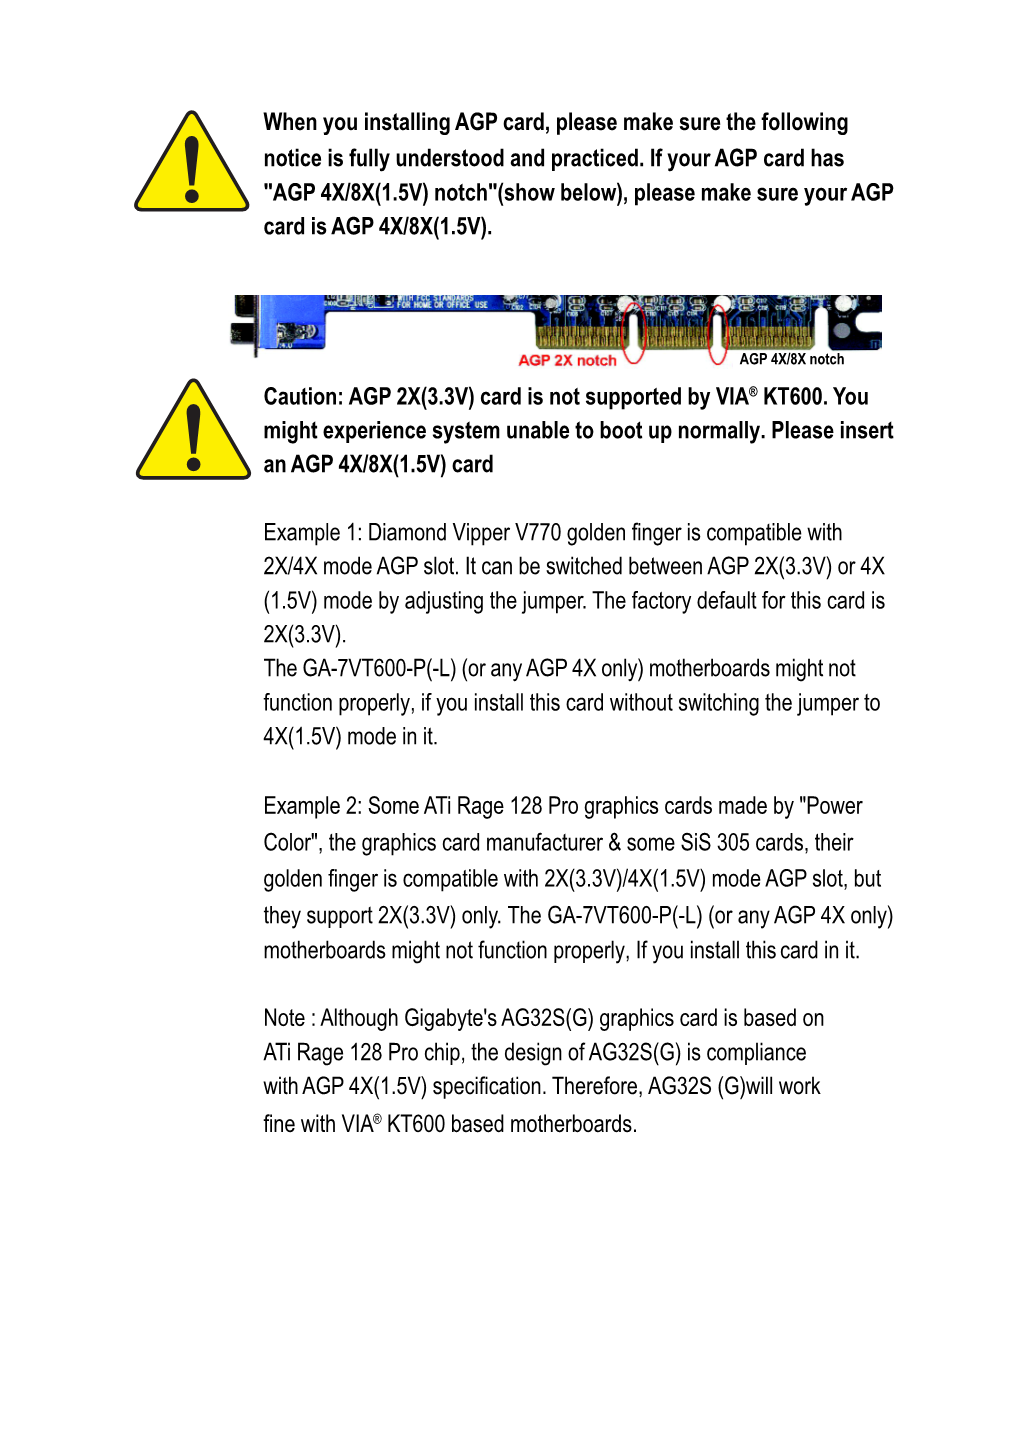 When You Installing AGP Card, Please Make Sure the Following Notice Is Fully Understood and Practiced